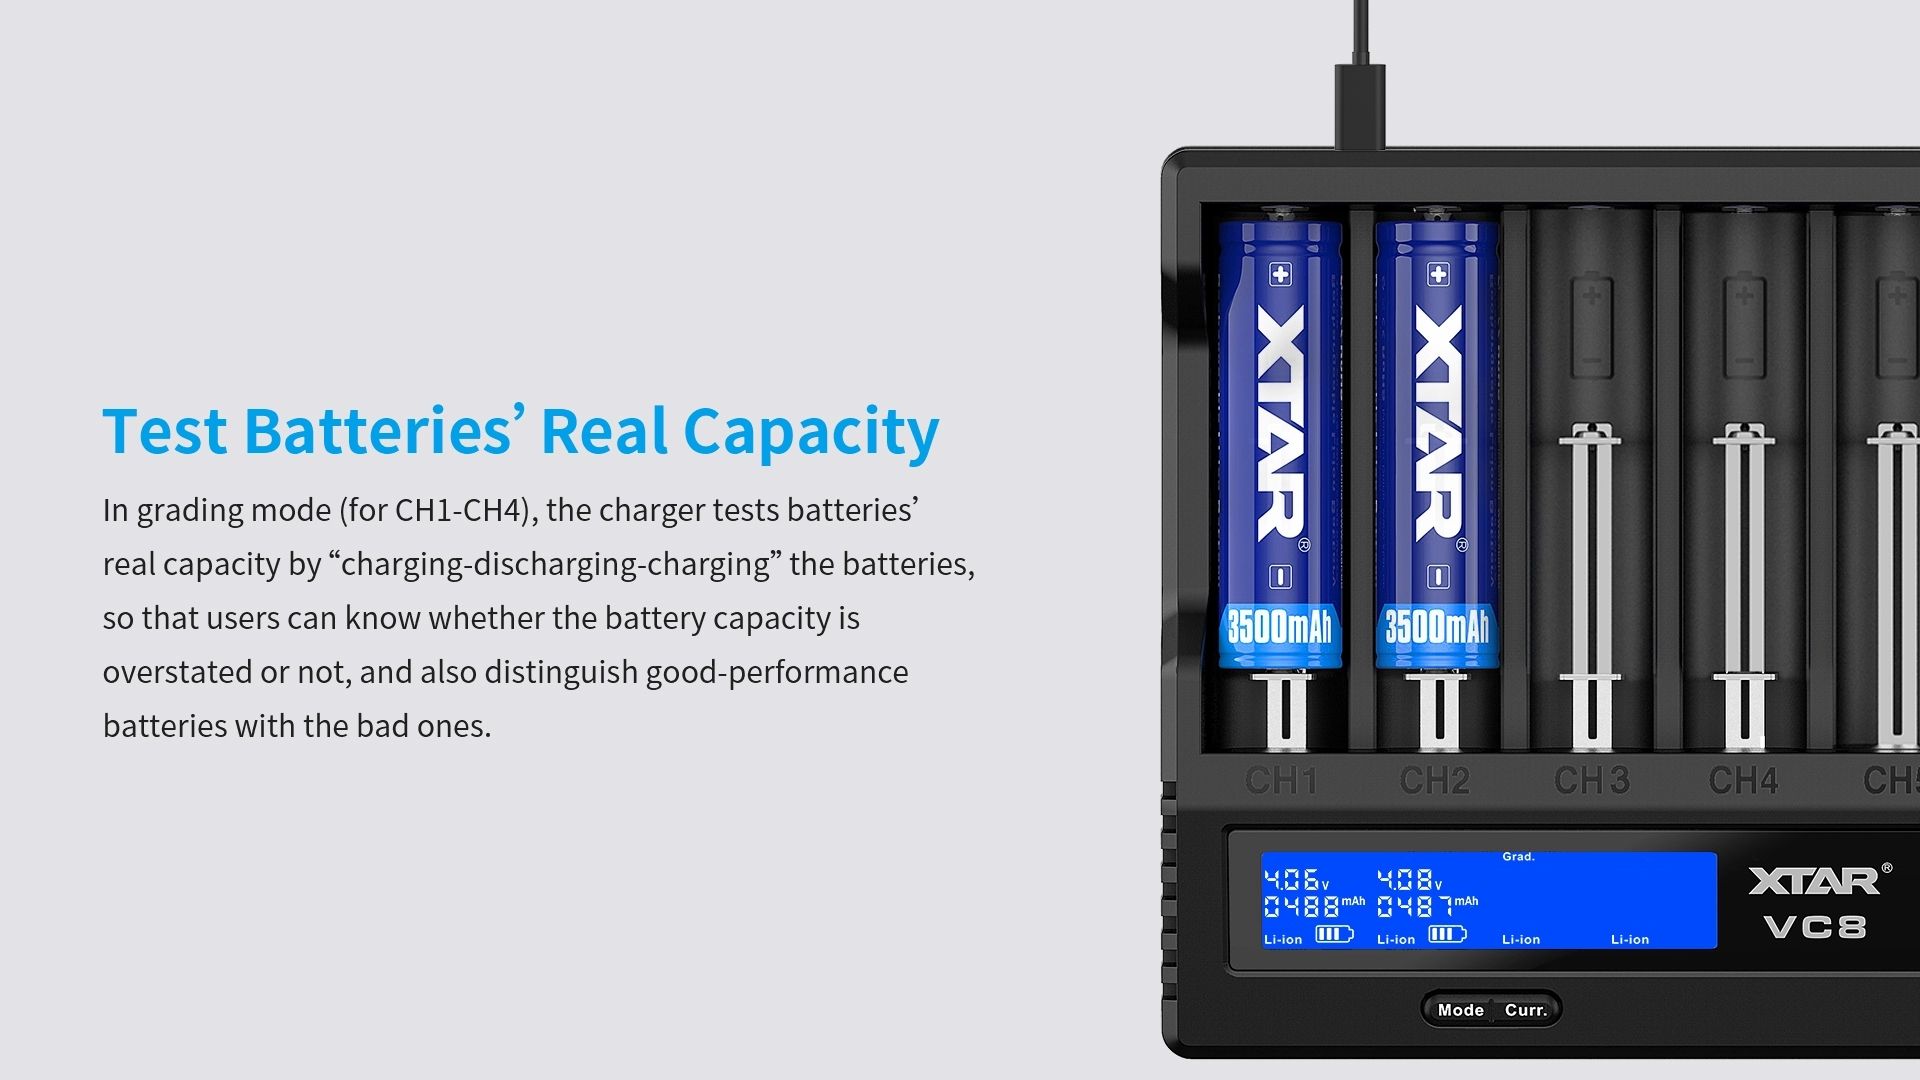 Xtar-VC8-8-Channel-21700-LED-Smart-Charger-with-LCD-Screen-For-Li-ion-NiMH-Batteries-1663188